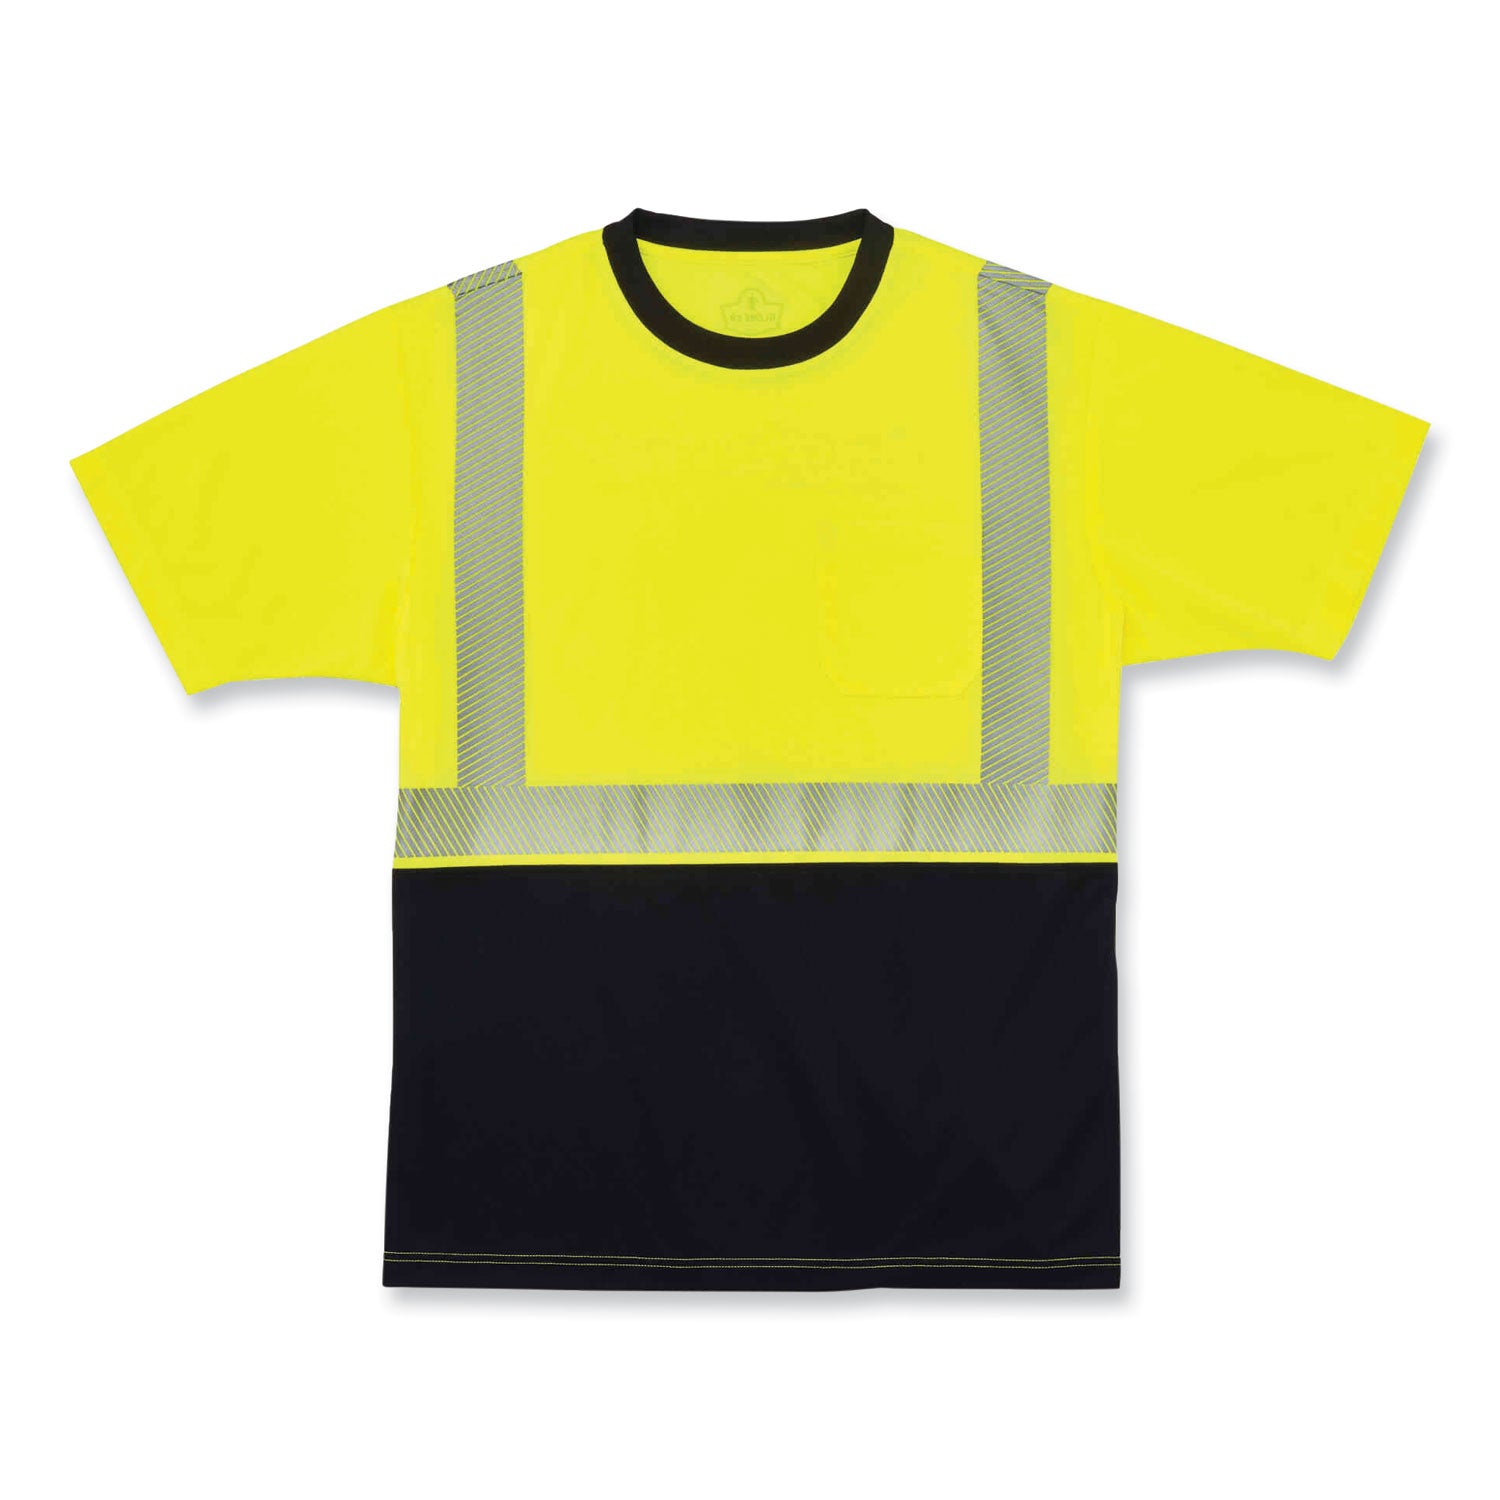 glowear-8280bk-class-2-performance-t-shirt-with-black-bottom-polyester-medium-lime-ships-in-1-3-business-days_ego22533 - 1